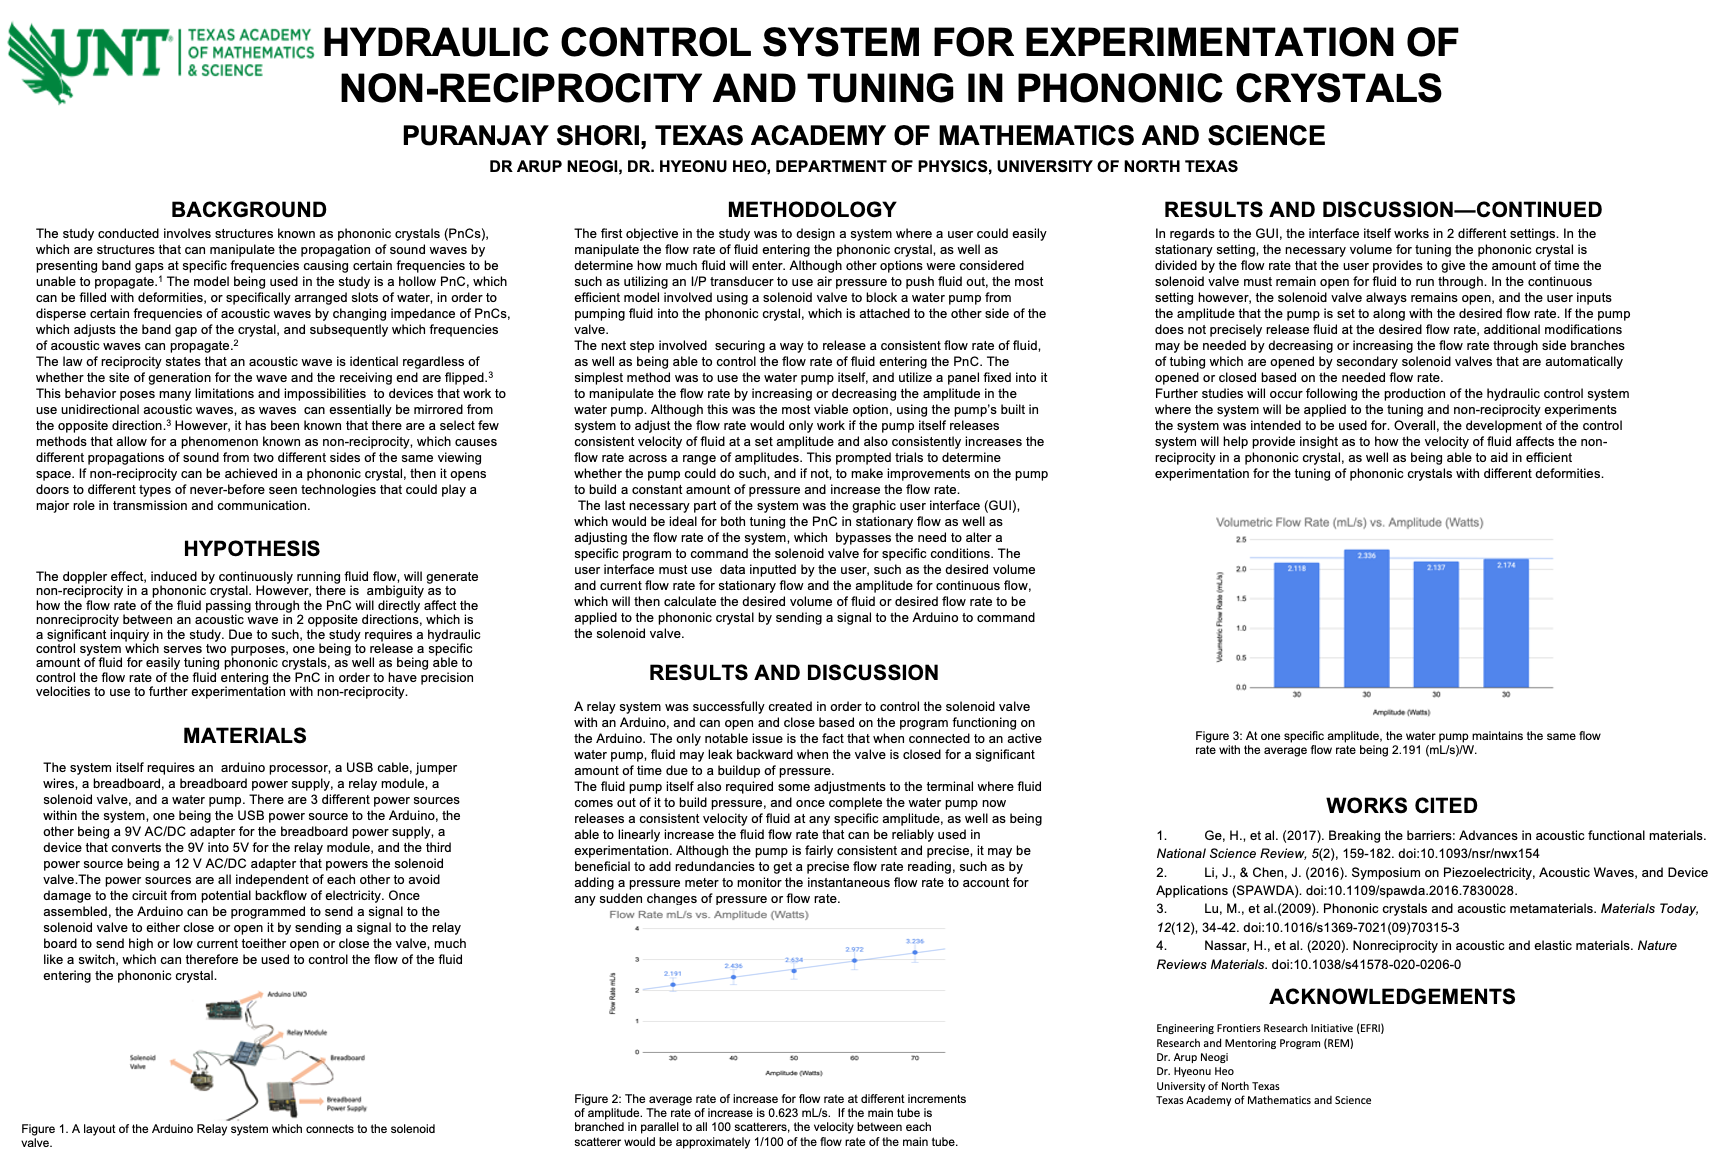 Hydraulic Control System for Experimentation of Non-Reciprocity in Phononic Crystals